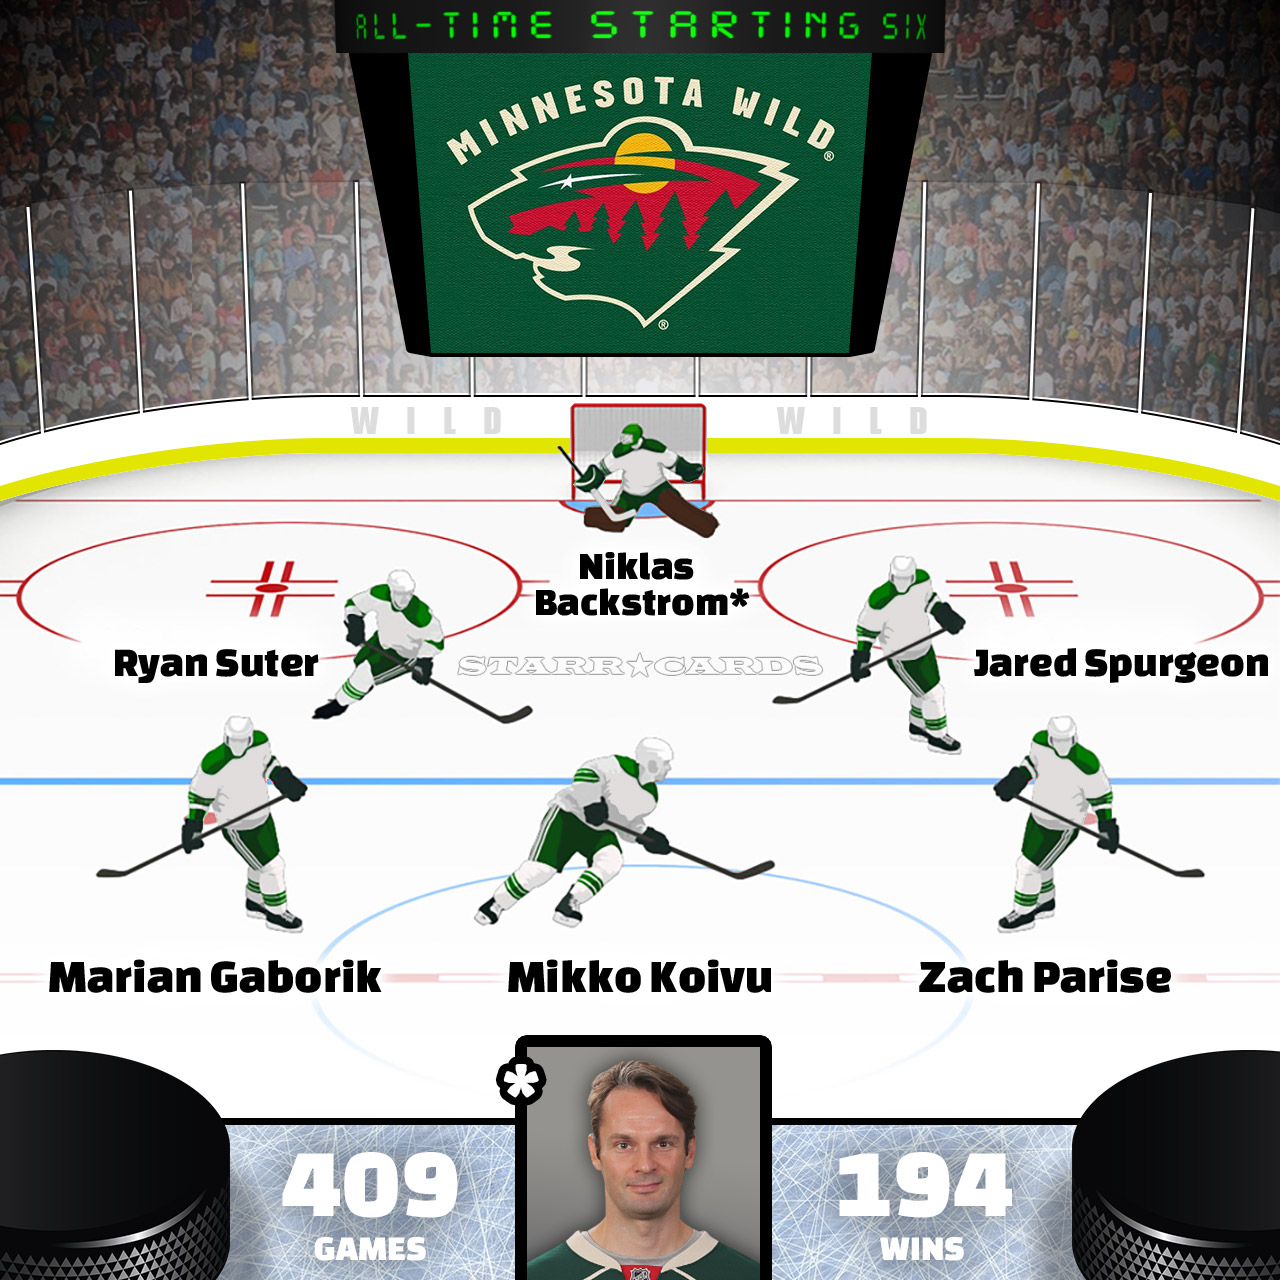 Niklas Backstrom leads Minnesota Wild all-time starting six by Point Shares